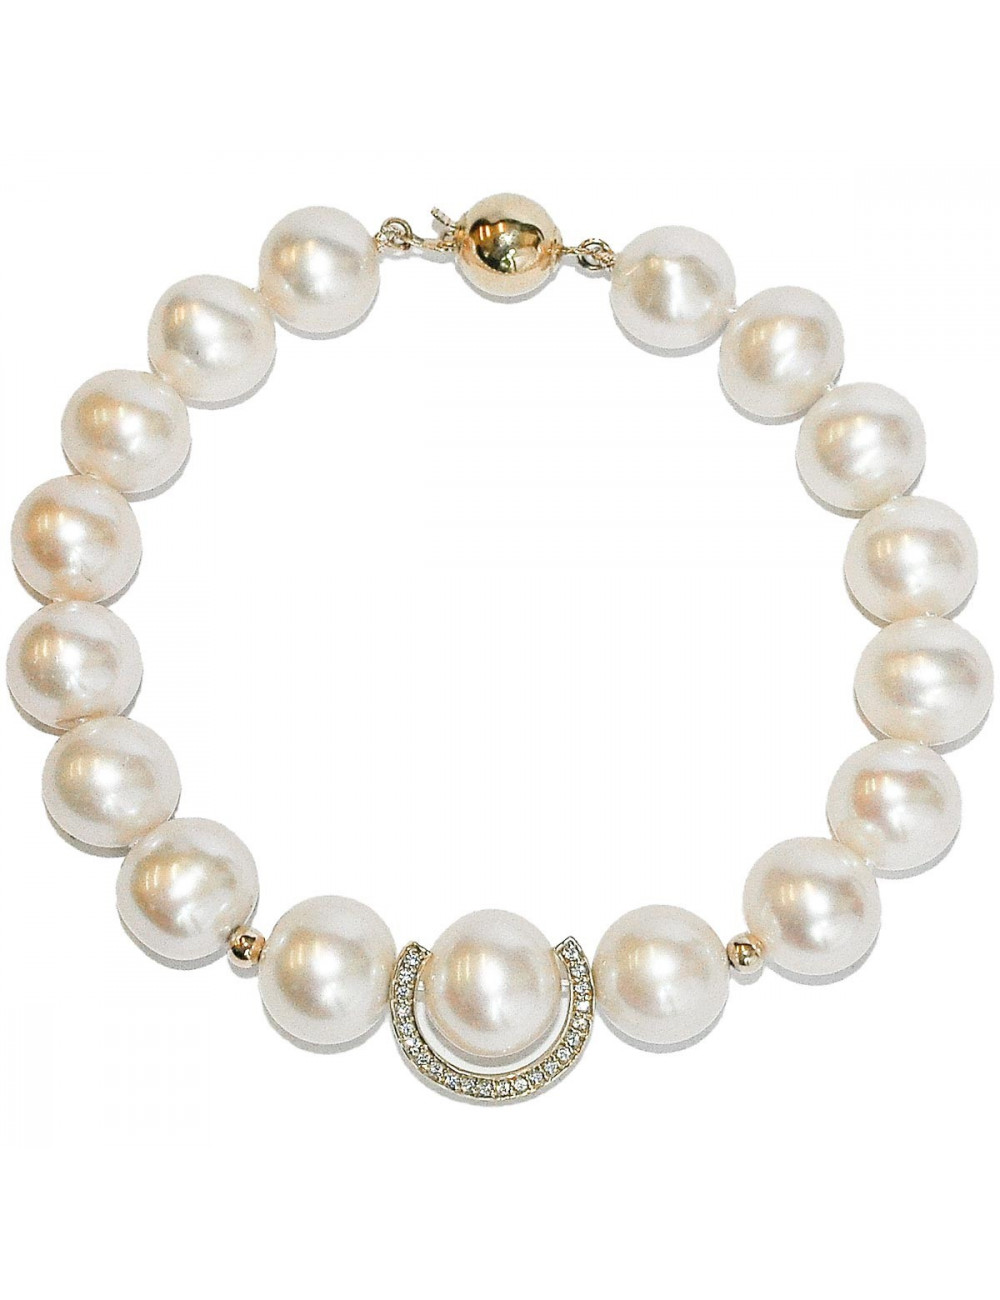 Bracelet of large white pearls with gold balls and horseshoe decorated with zircons B1011Gcz3